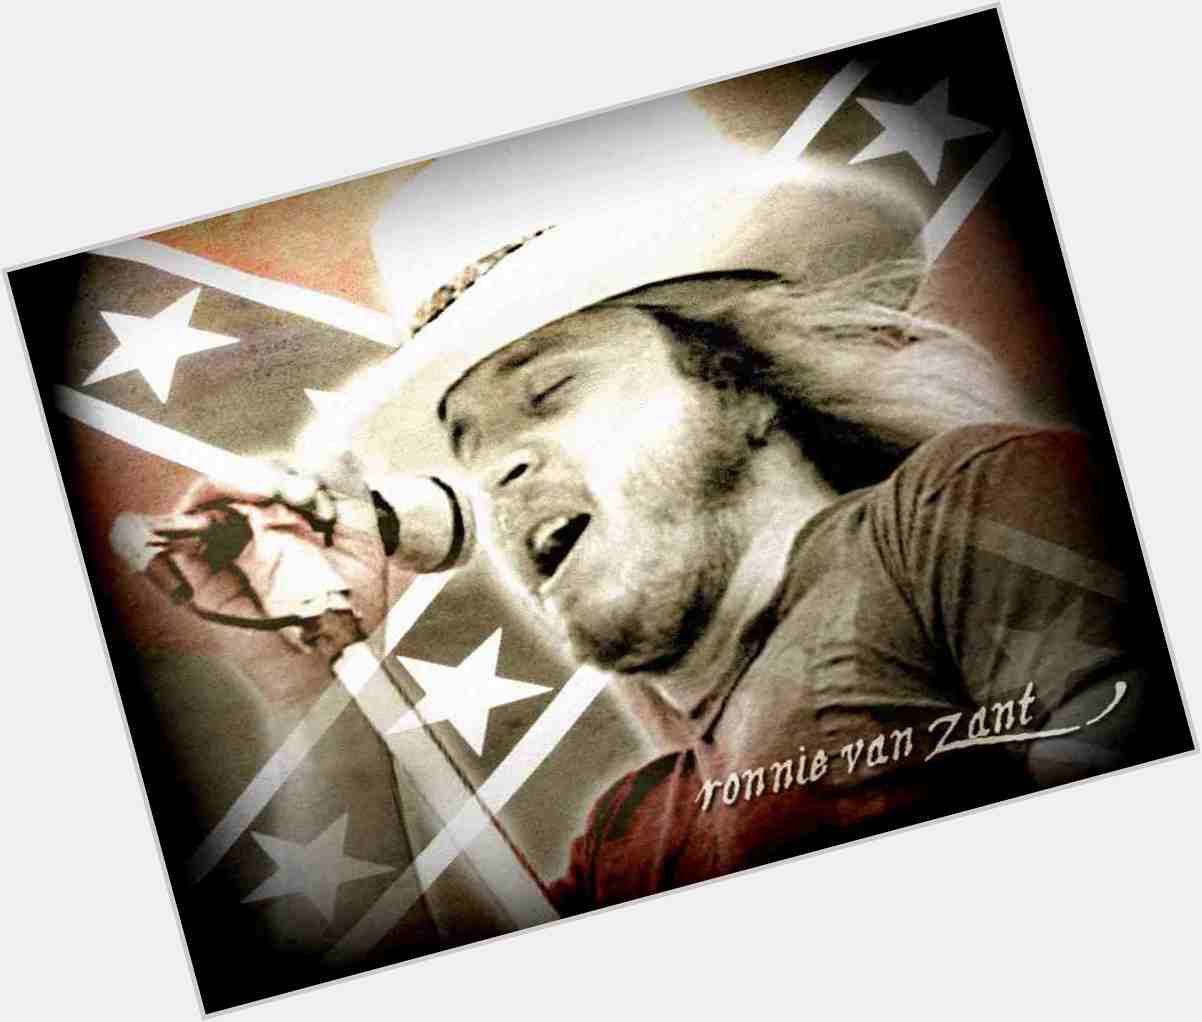 Happy birthday to the greatest lead singer there ever was, Mr. Ronnie Van Zant!! He would\ve been 67 today. 